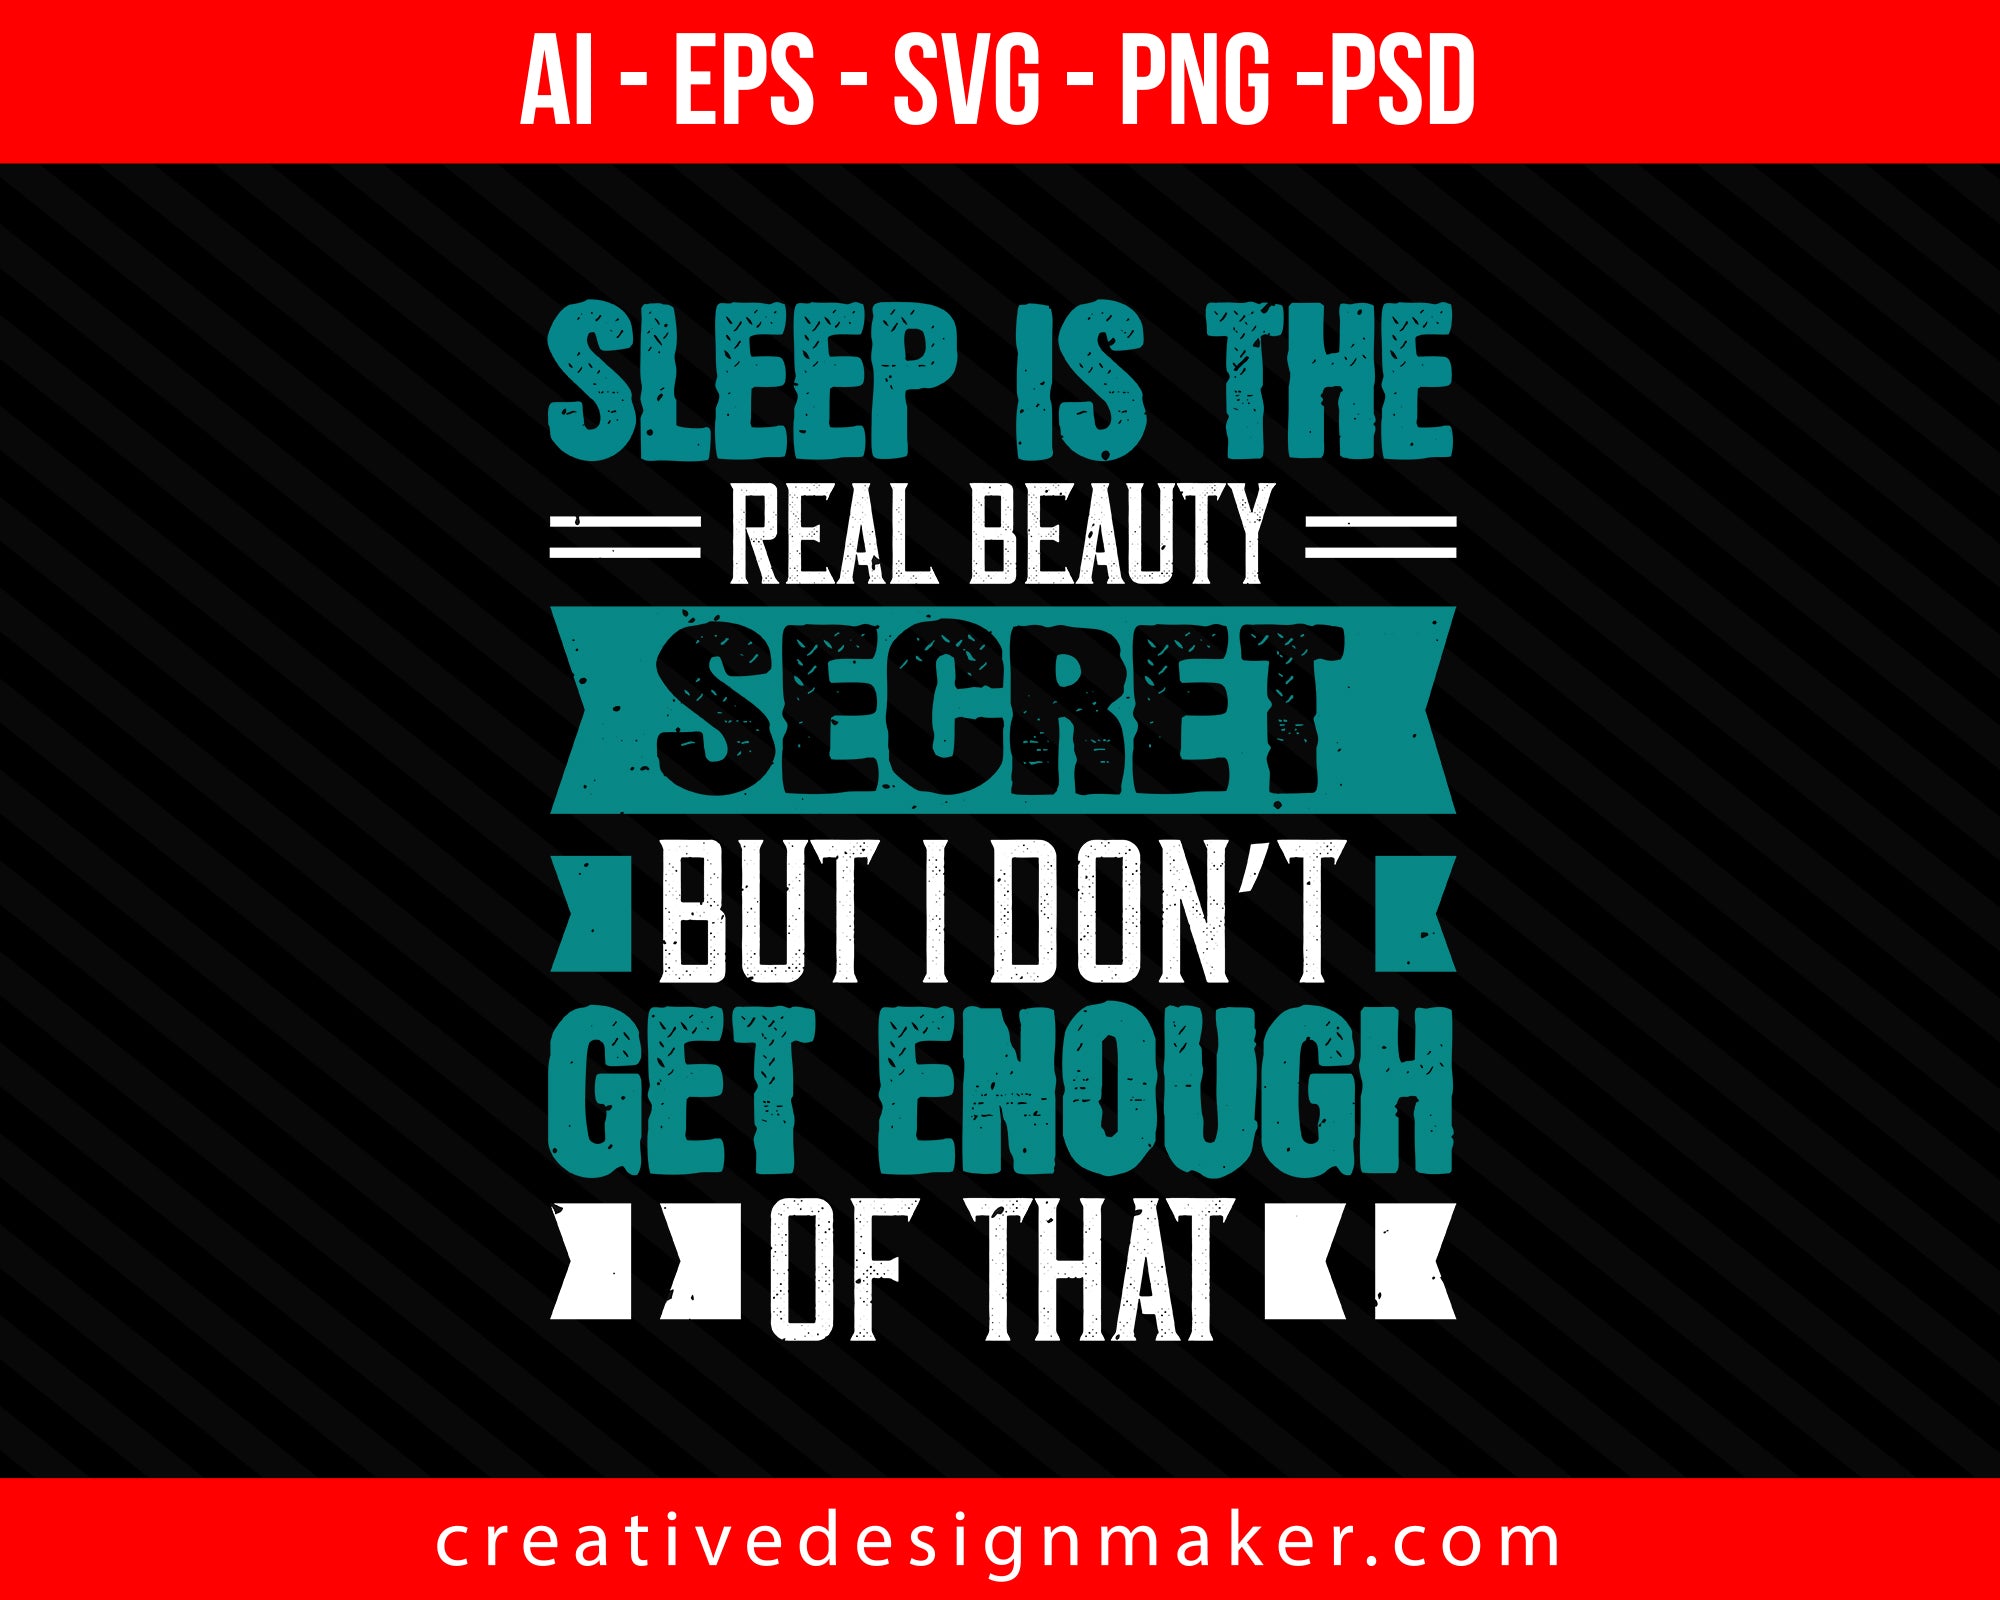 Sleep is the real beauty secret, but I don’t get enough of that Print Ready Editable T-Shirt SVG Design!